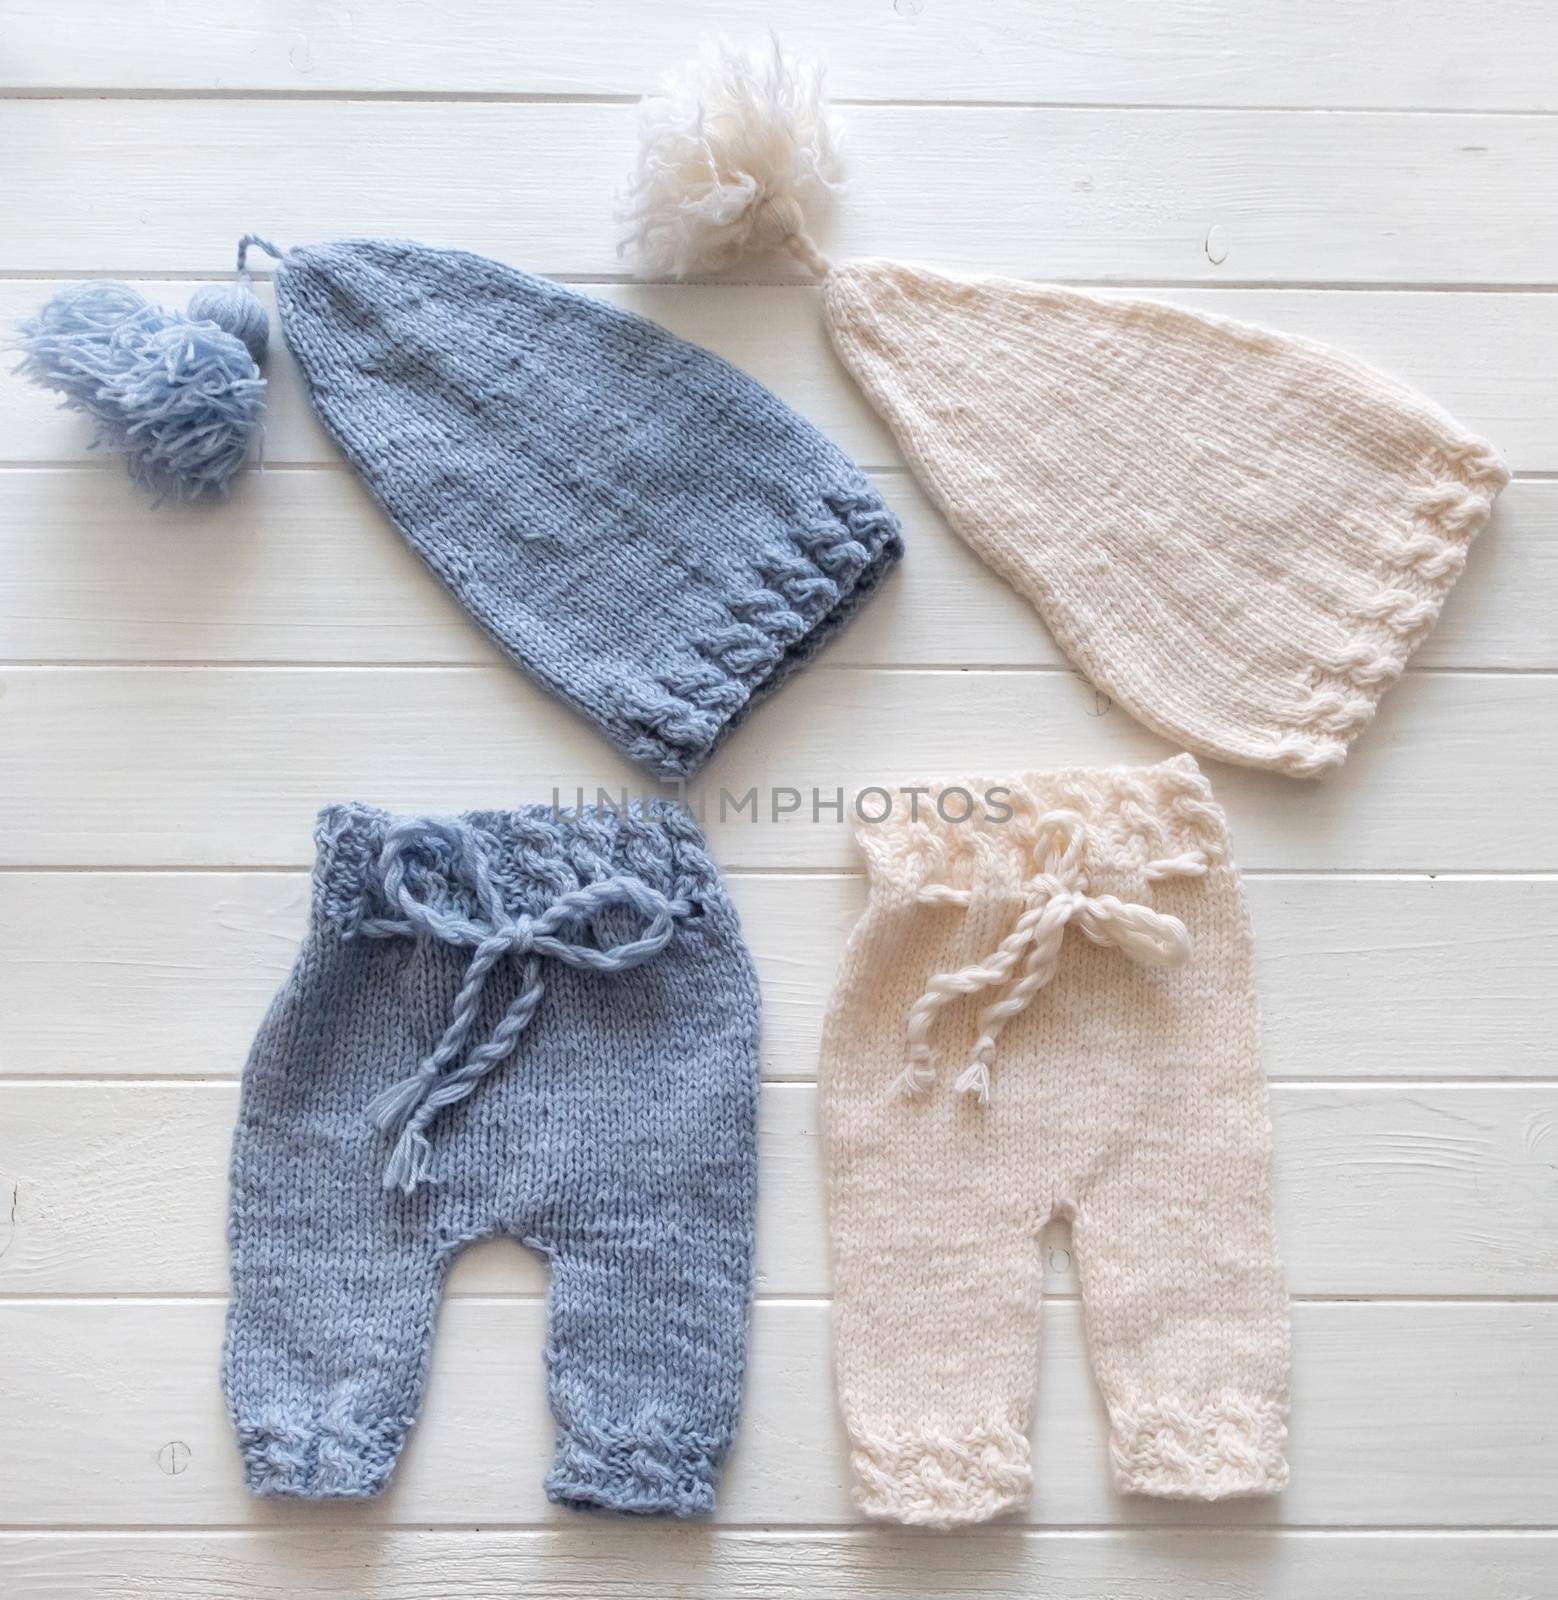 Cute blue and white knitted hats and pants for babies on the white table